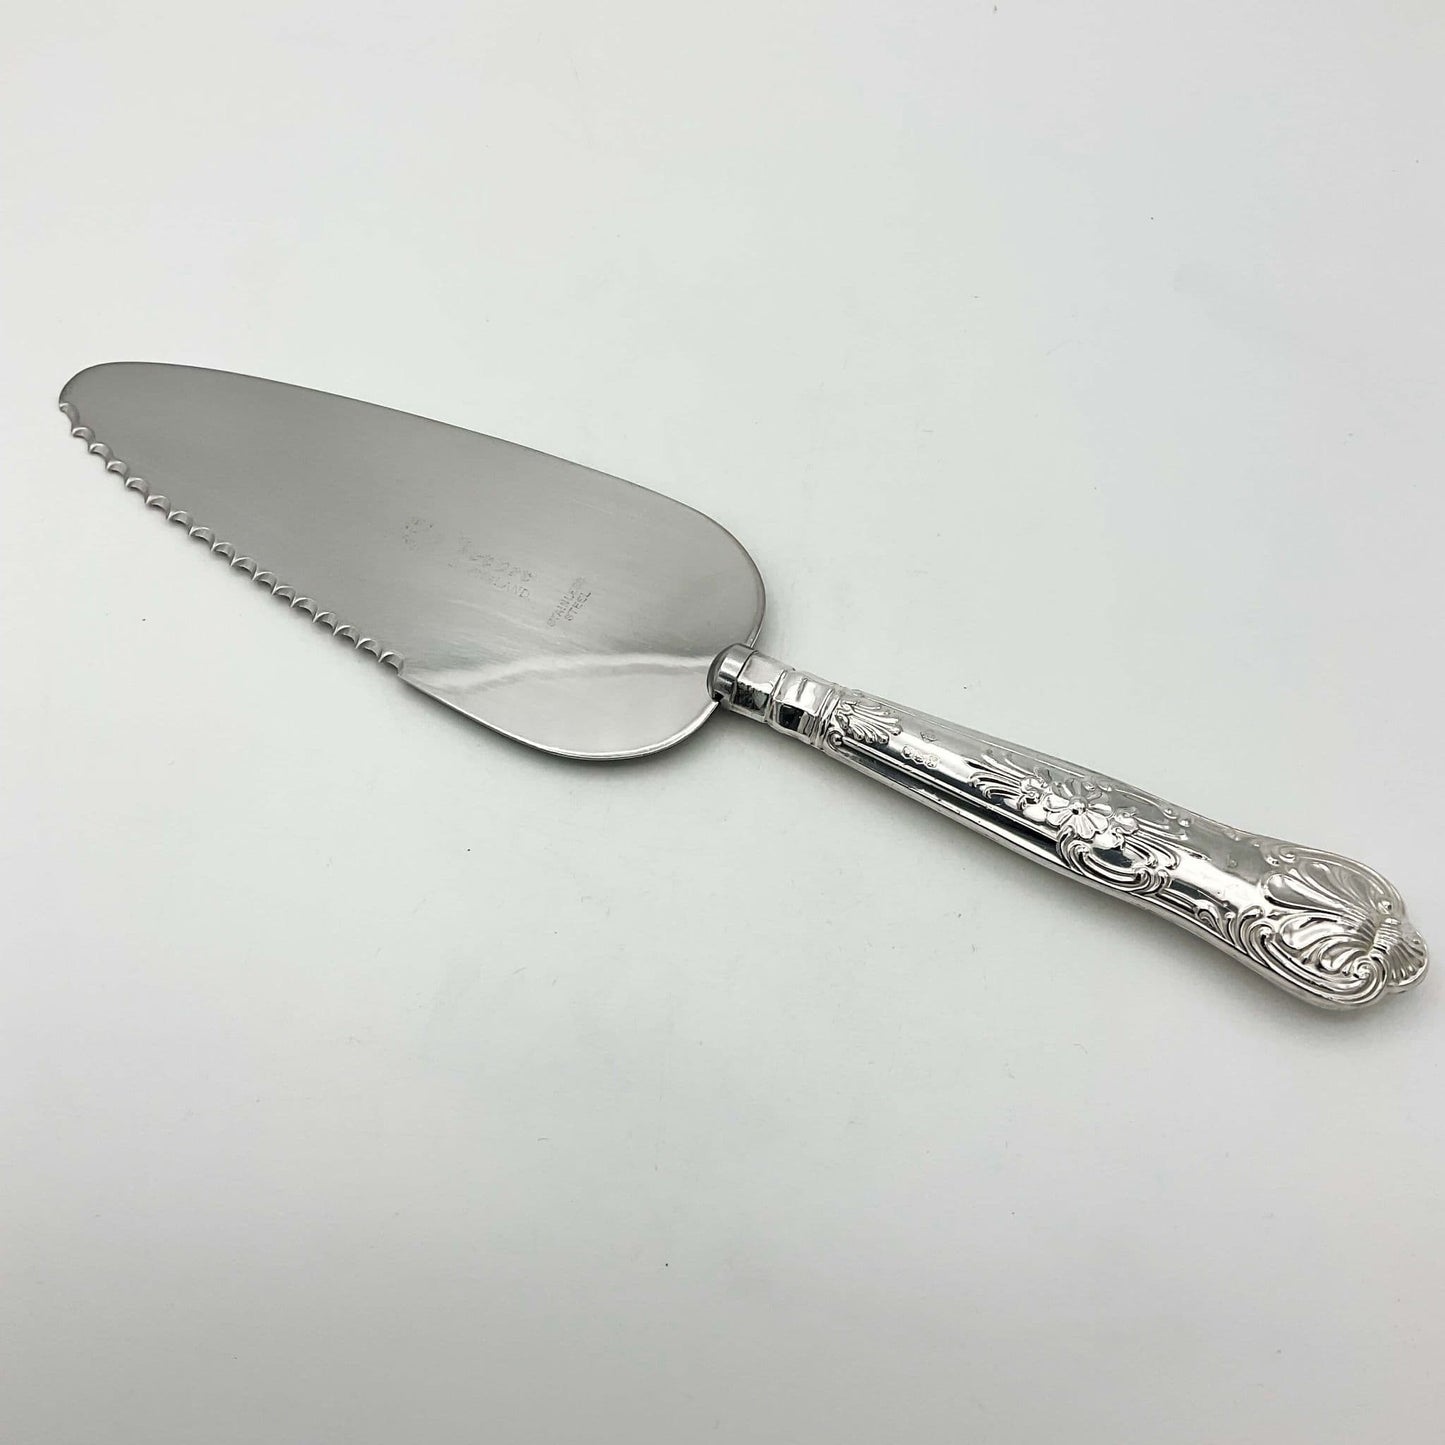 A silver coloured metal cake or pie slice on a white background. The handle has a Queens pattern elaborate design.